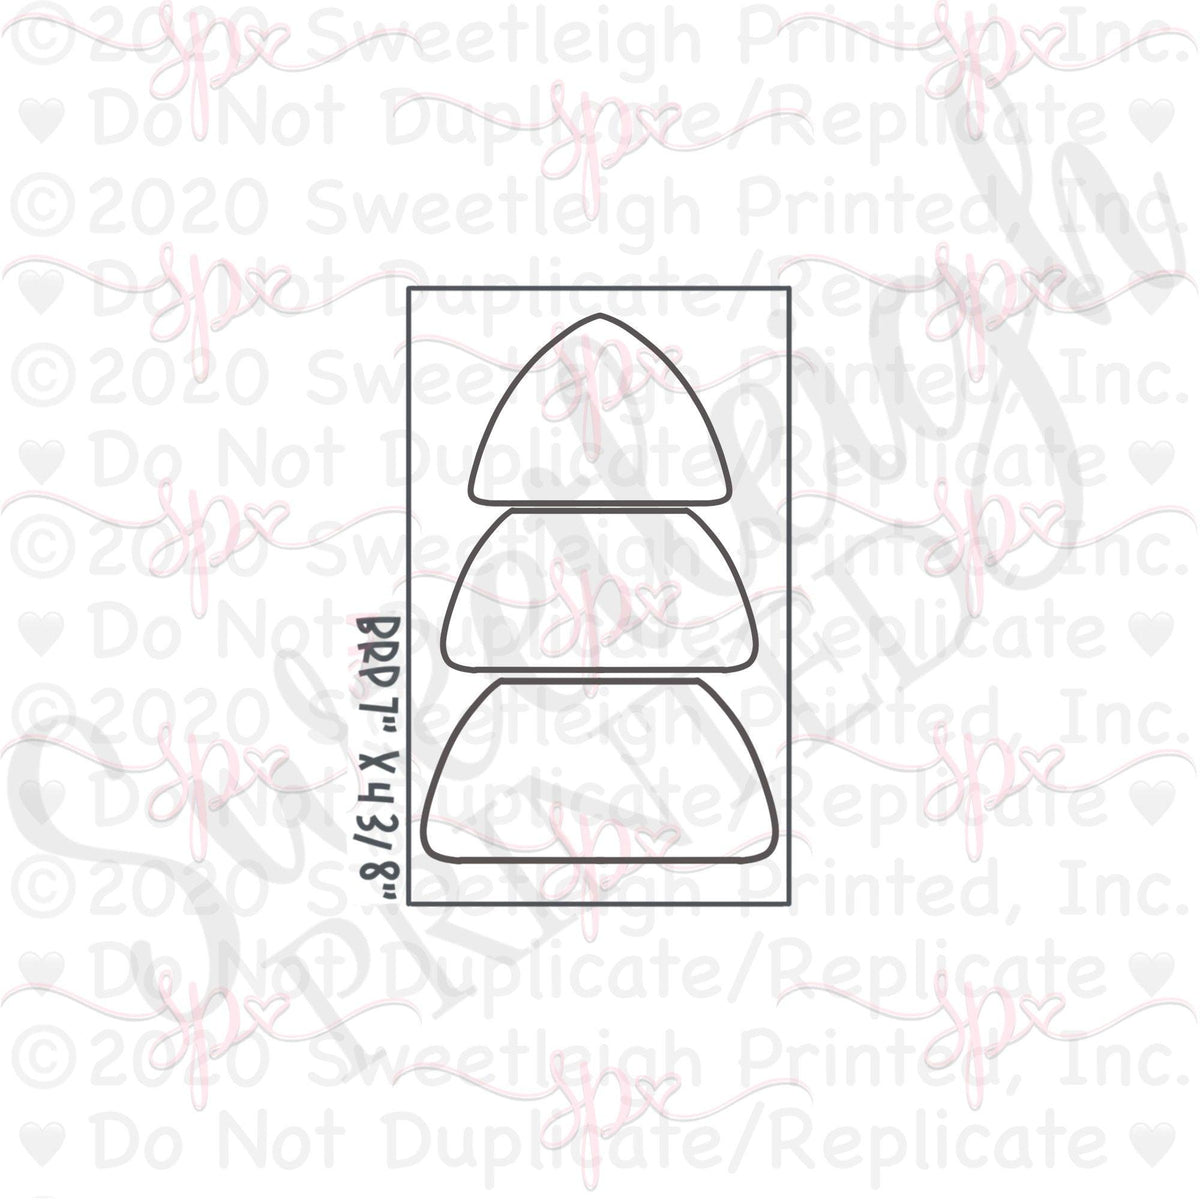 Cakesmith Build a Christmas Tree Cookie Cutter Set - Sweetleigh 